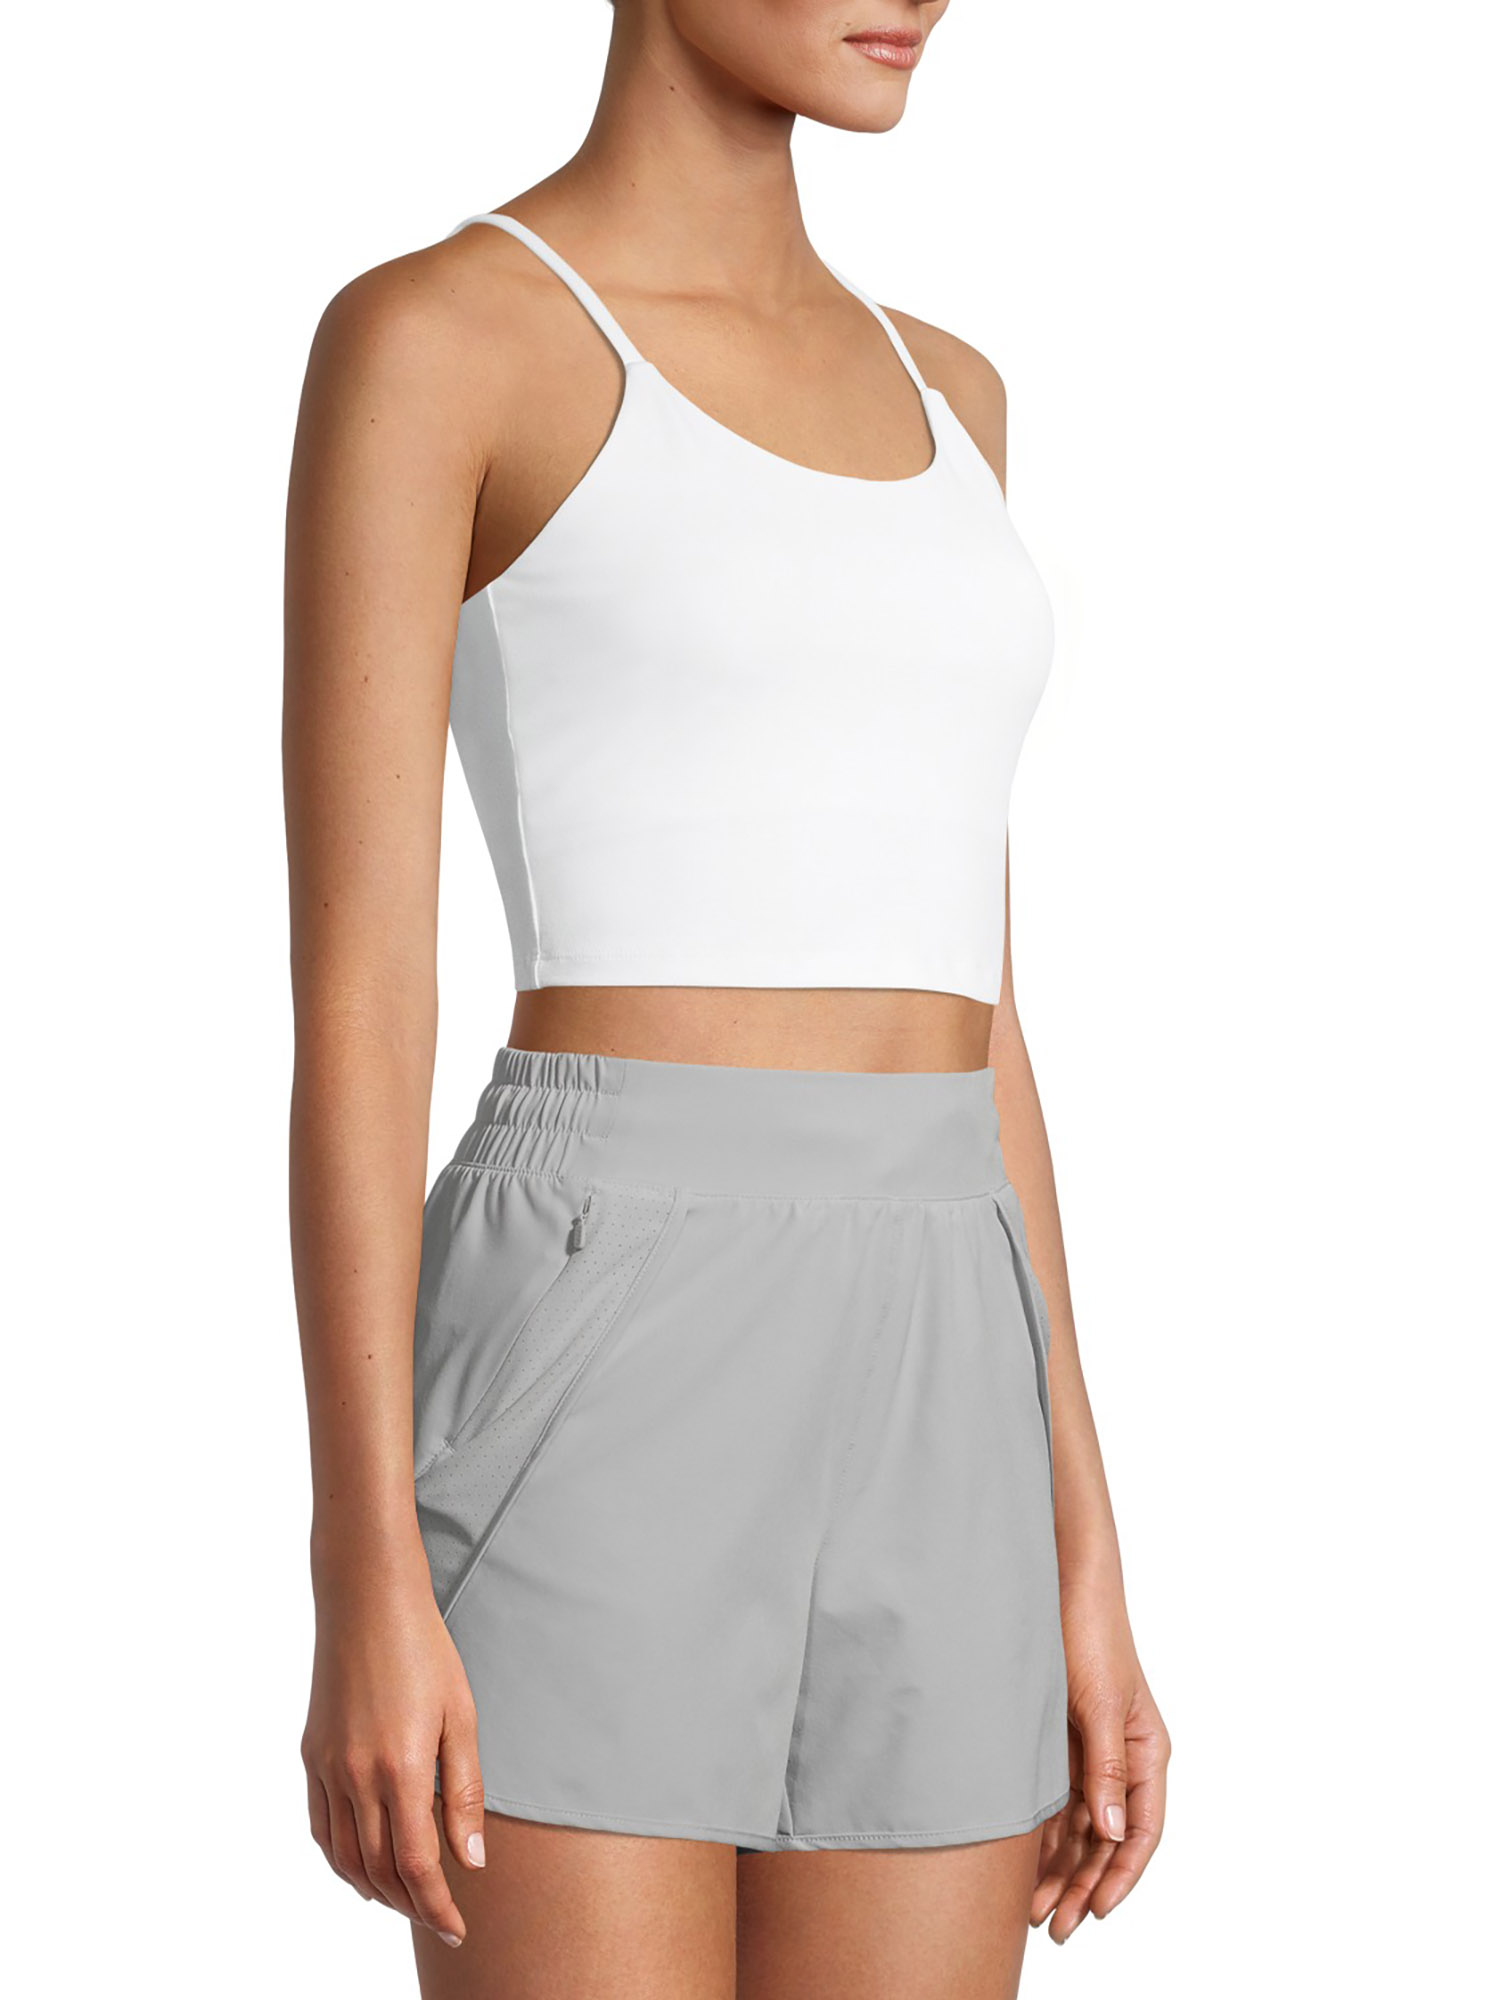 Avia Low Impact Sports Crop with Shelf Bra and Removable Pads - image 3 of 7